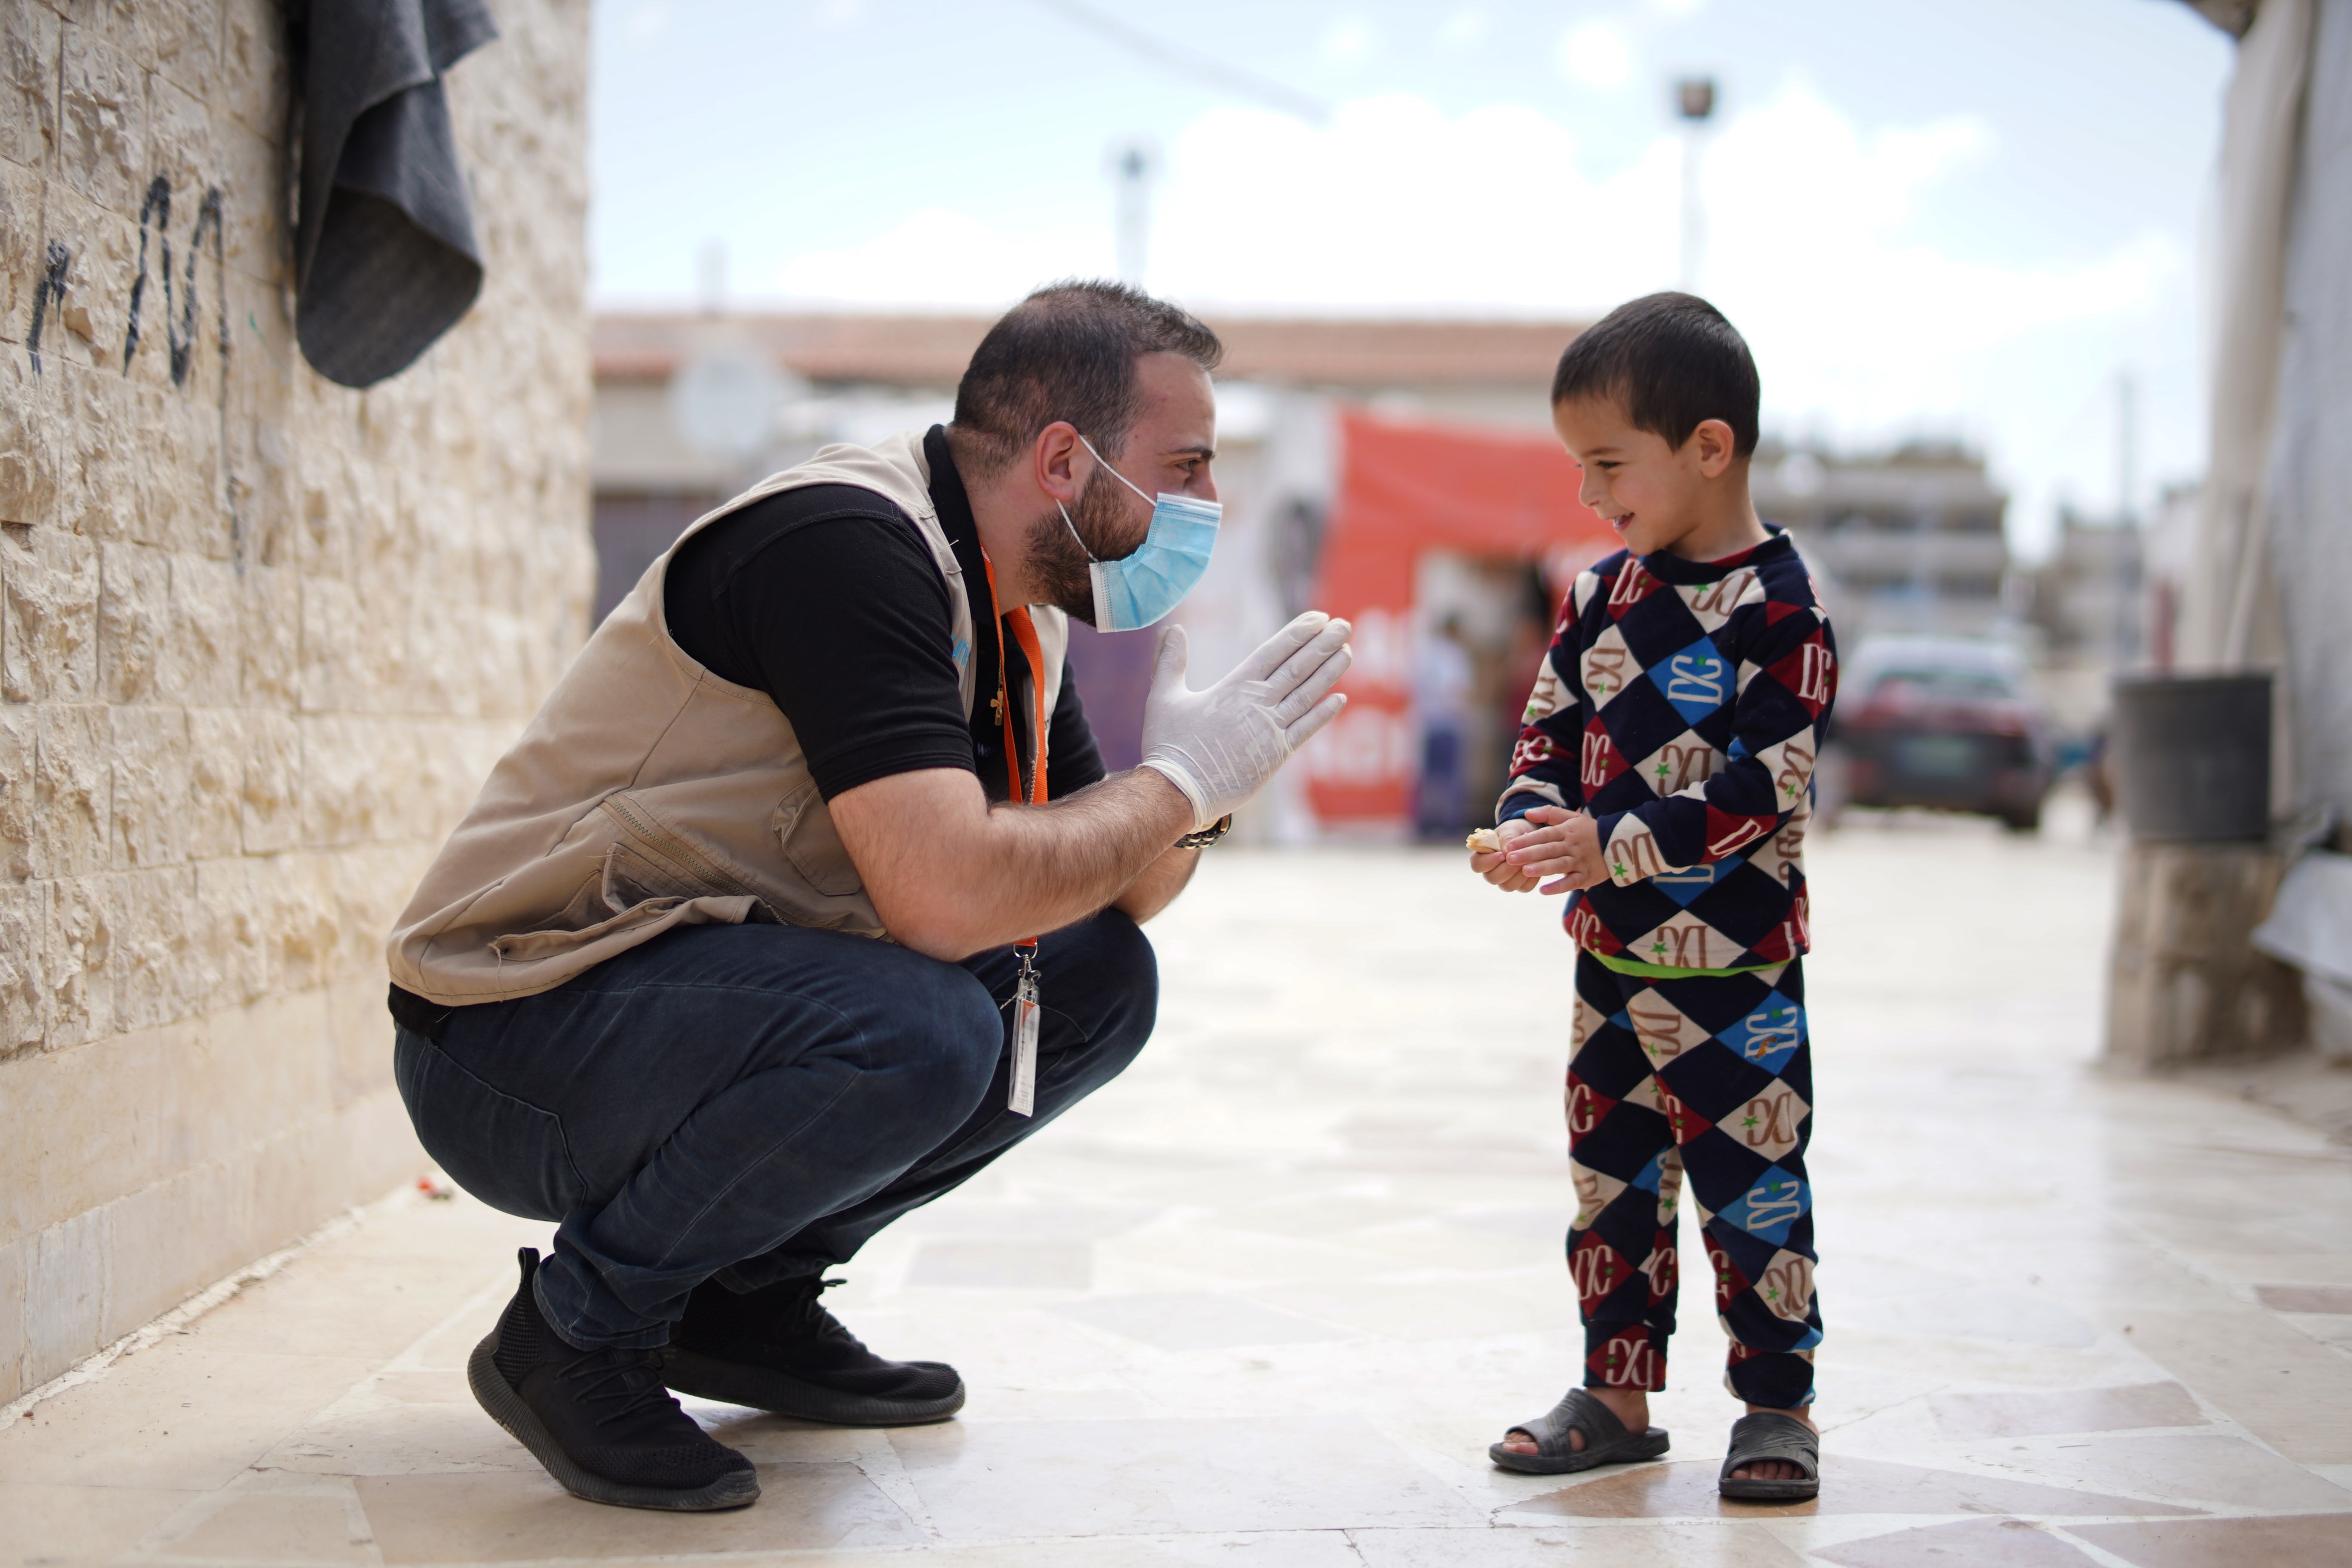 A member of the World Vision's team in Lebanon makes a friend whilst doing our work distributing door to door bleach and sanitizing products to the Syrian refugees